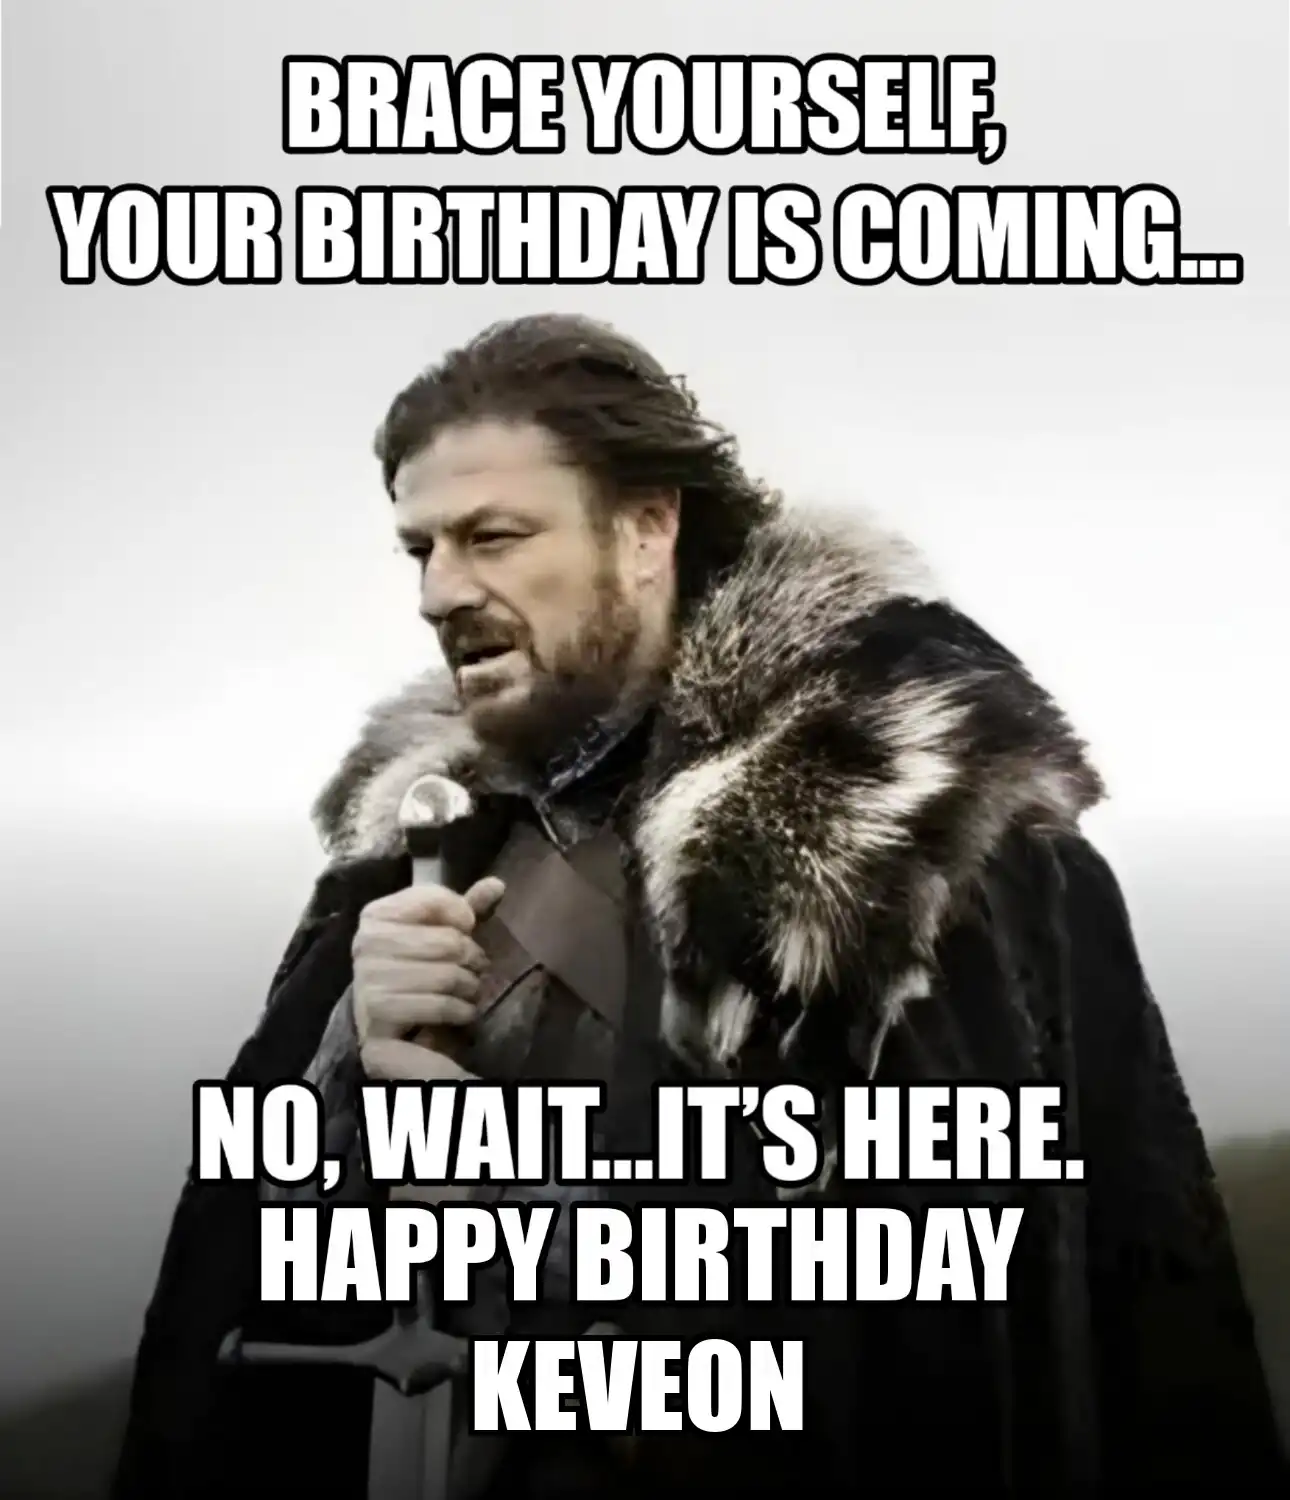 Happy Birthday Keveon Brace Yourself Your Birthday Is Coming Meme